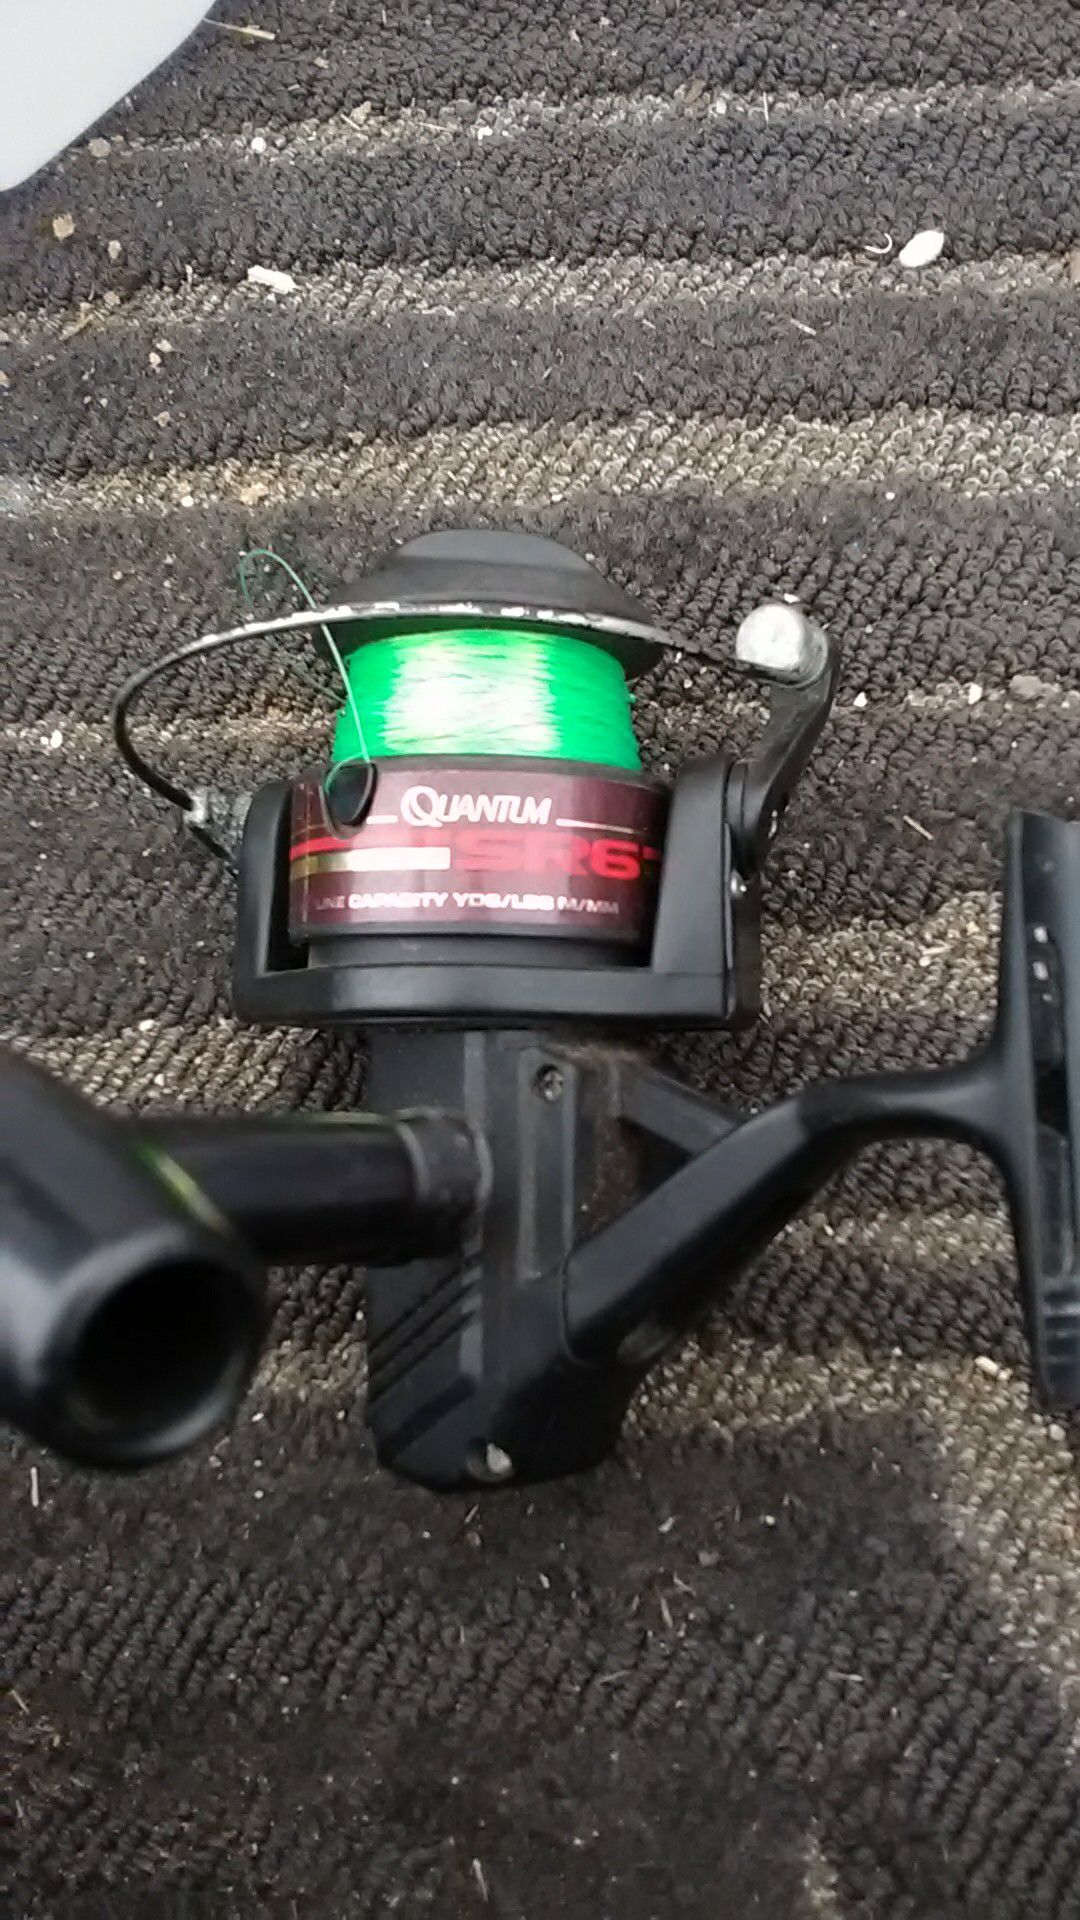 Fishing reels. One is a quantum the other is a master.